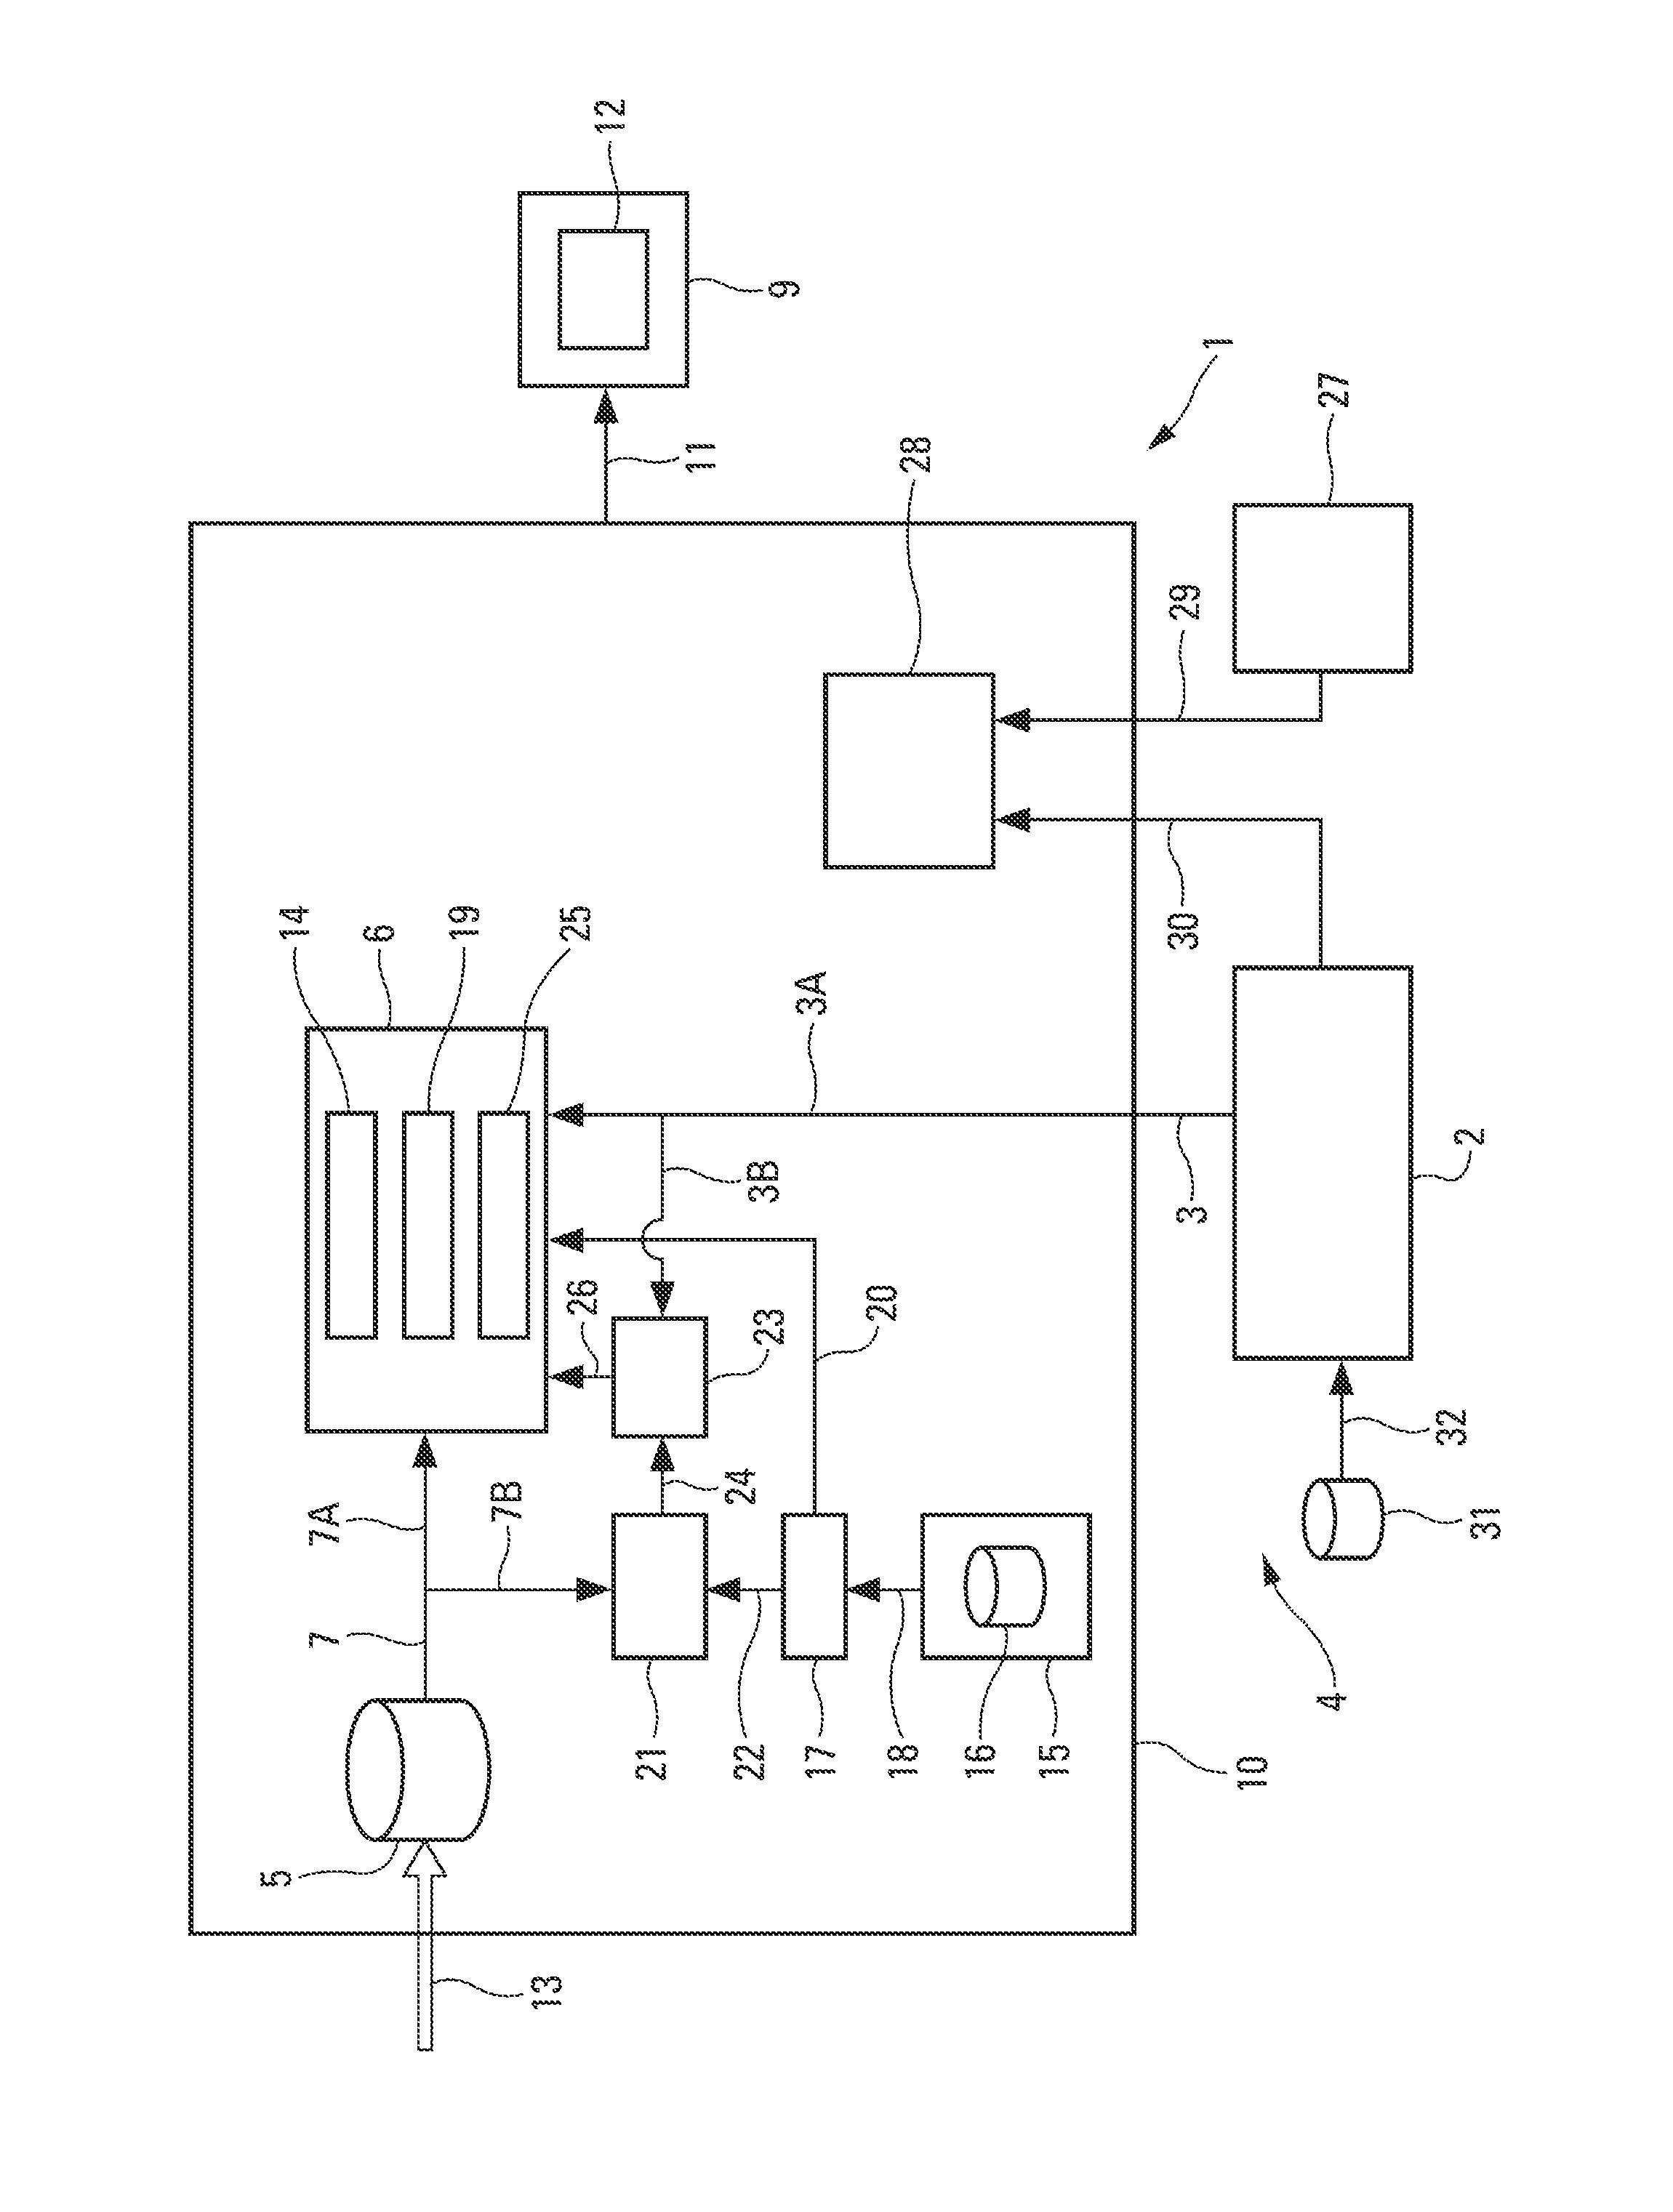 Method and device for automatically monitoring a flight path of an aircraft during an operation with required navigation performance.